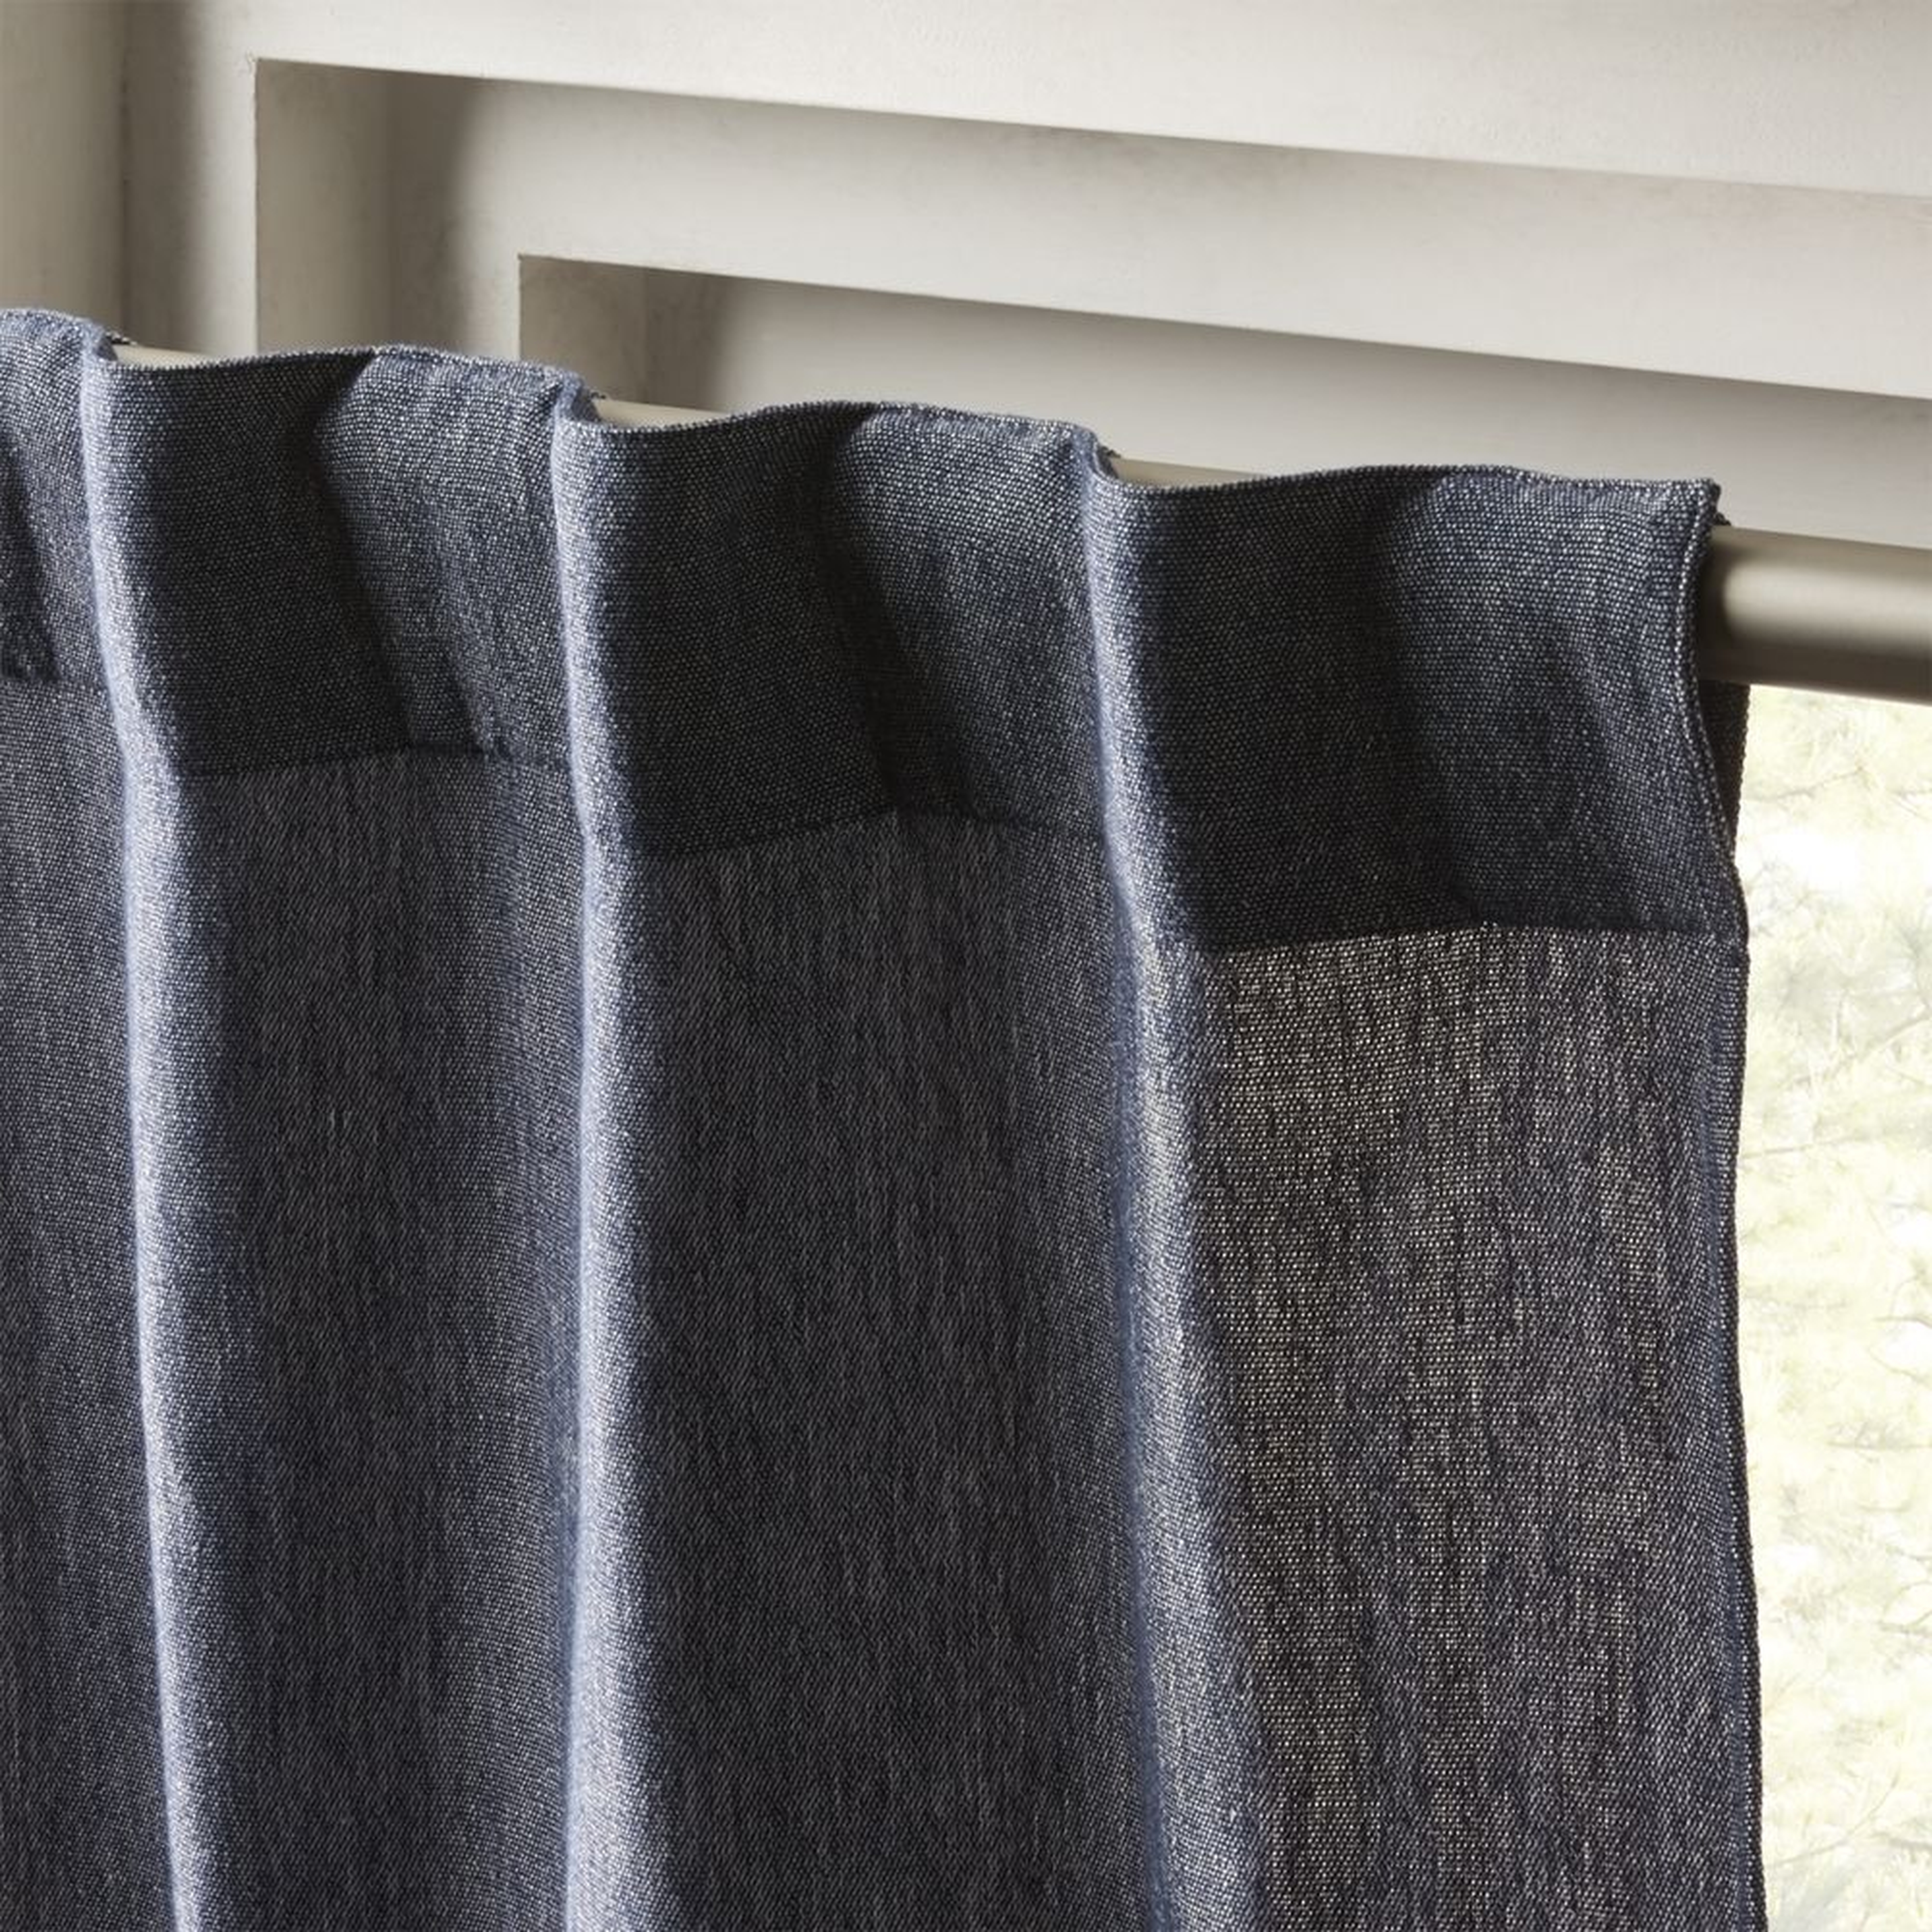 Weekendr Blue Chambray Curtain Panel 48"x120" - CB2